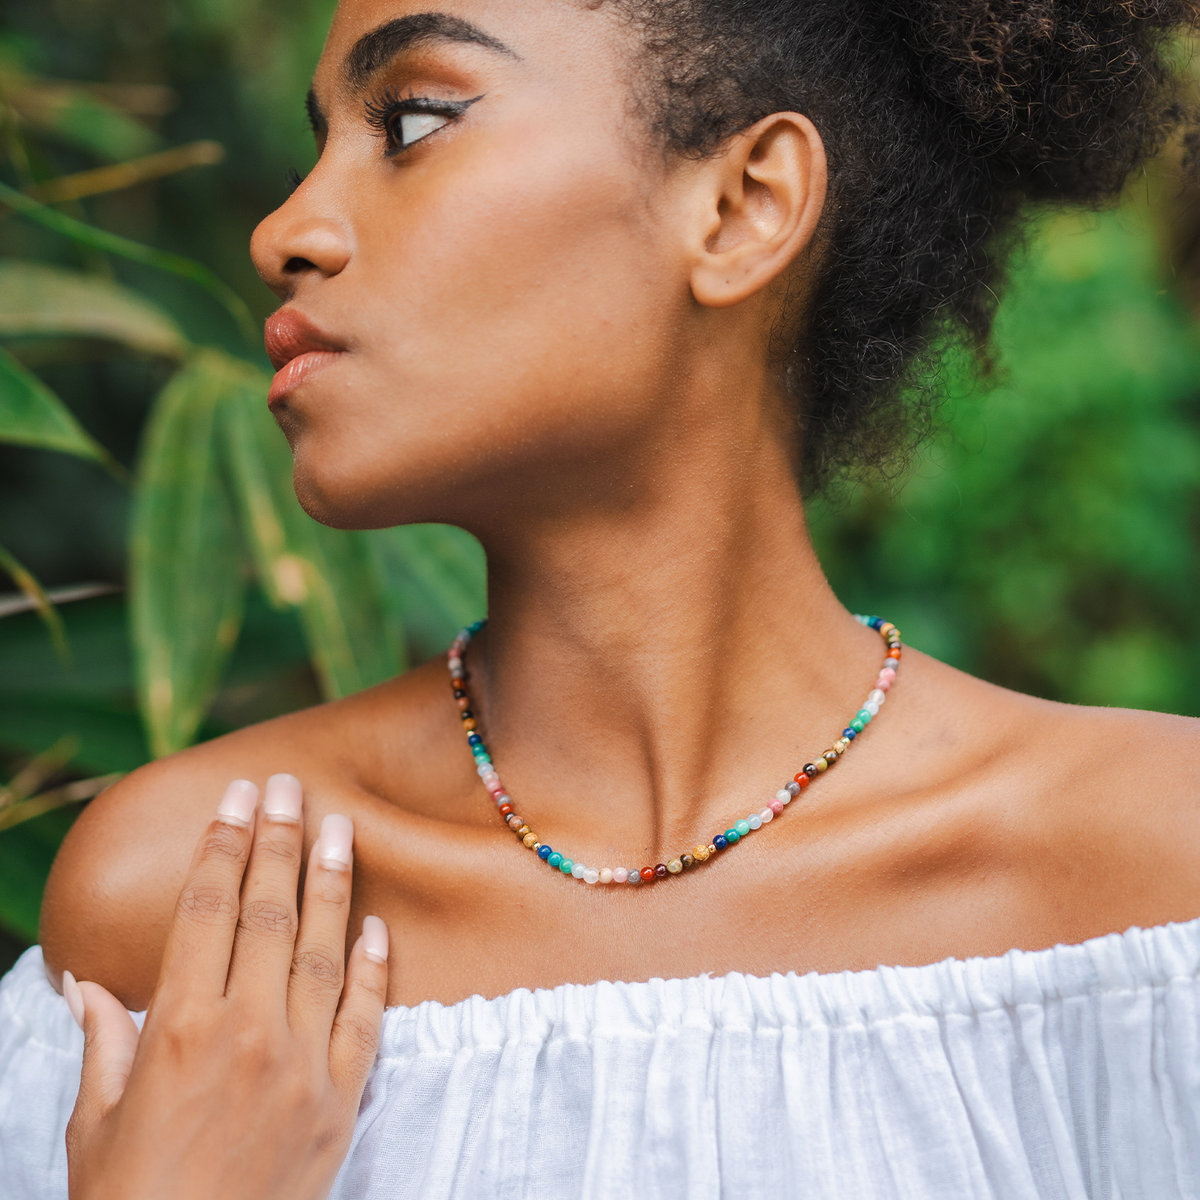 Model wearing 4mm multicolor stone necklace